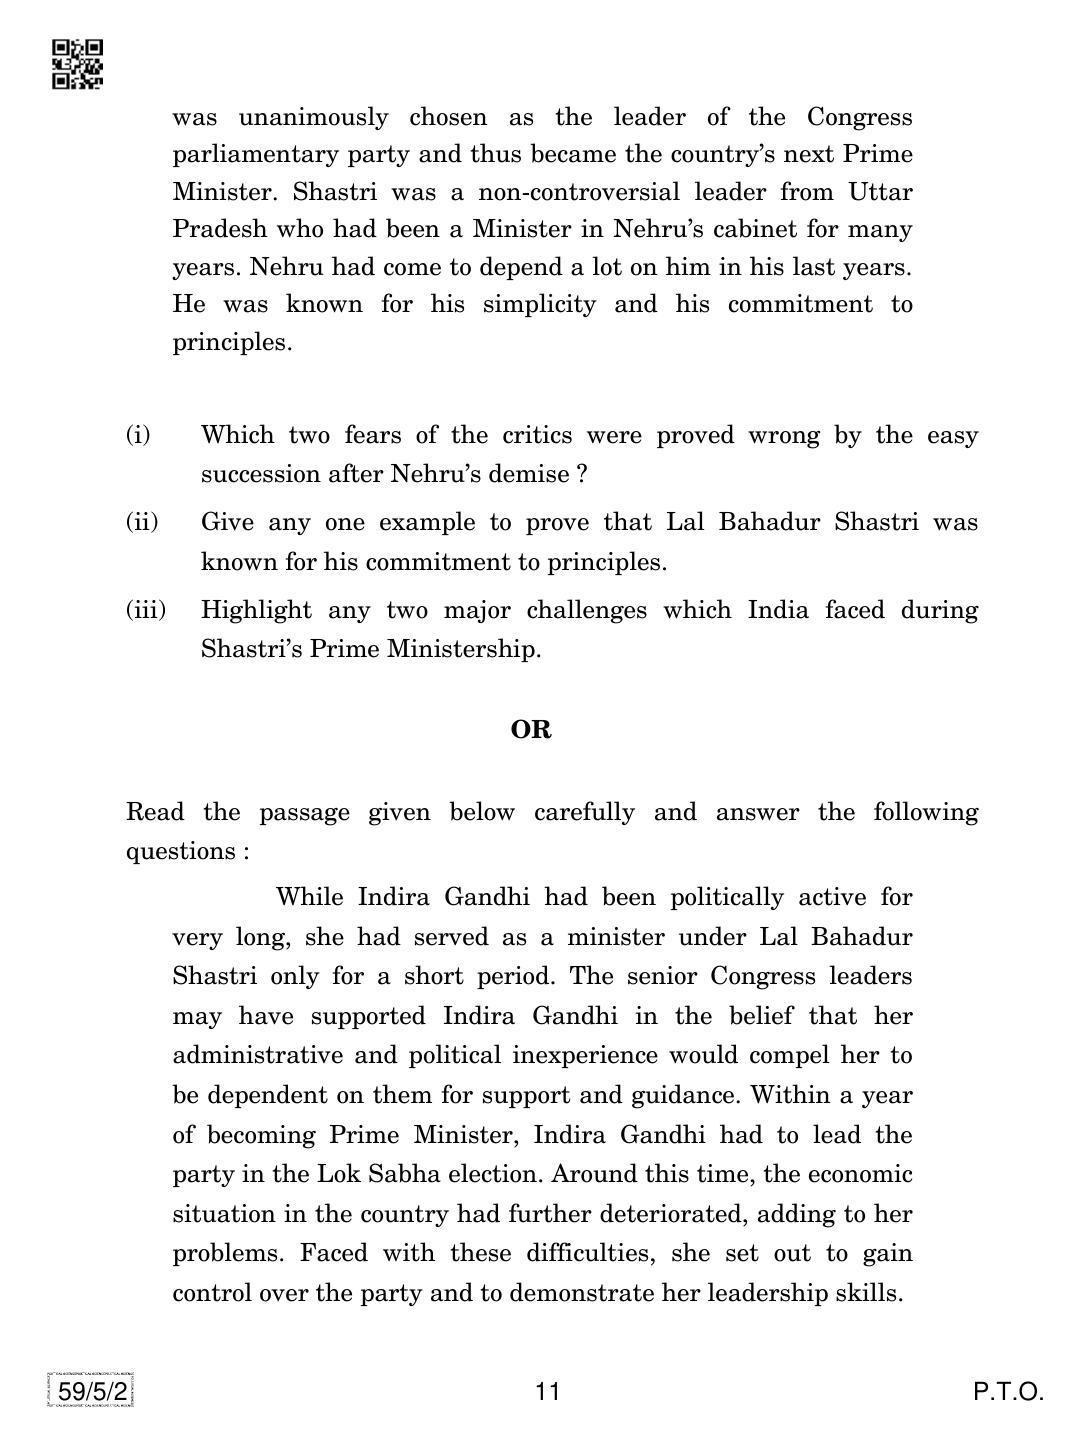 CBSE Class 12 59-5-2 Political Science 2019 Question Paper - Page 11